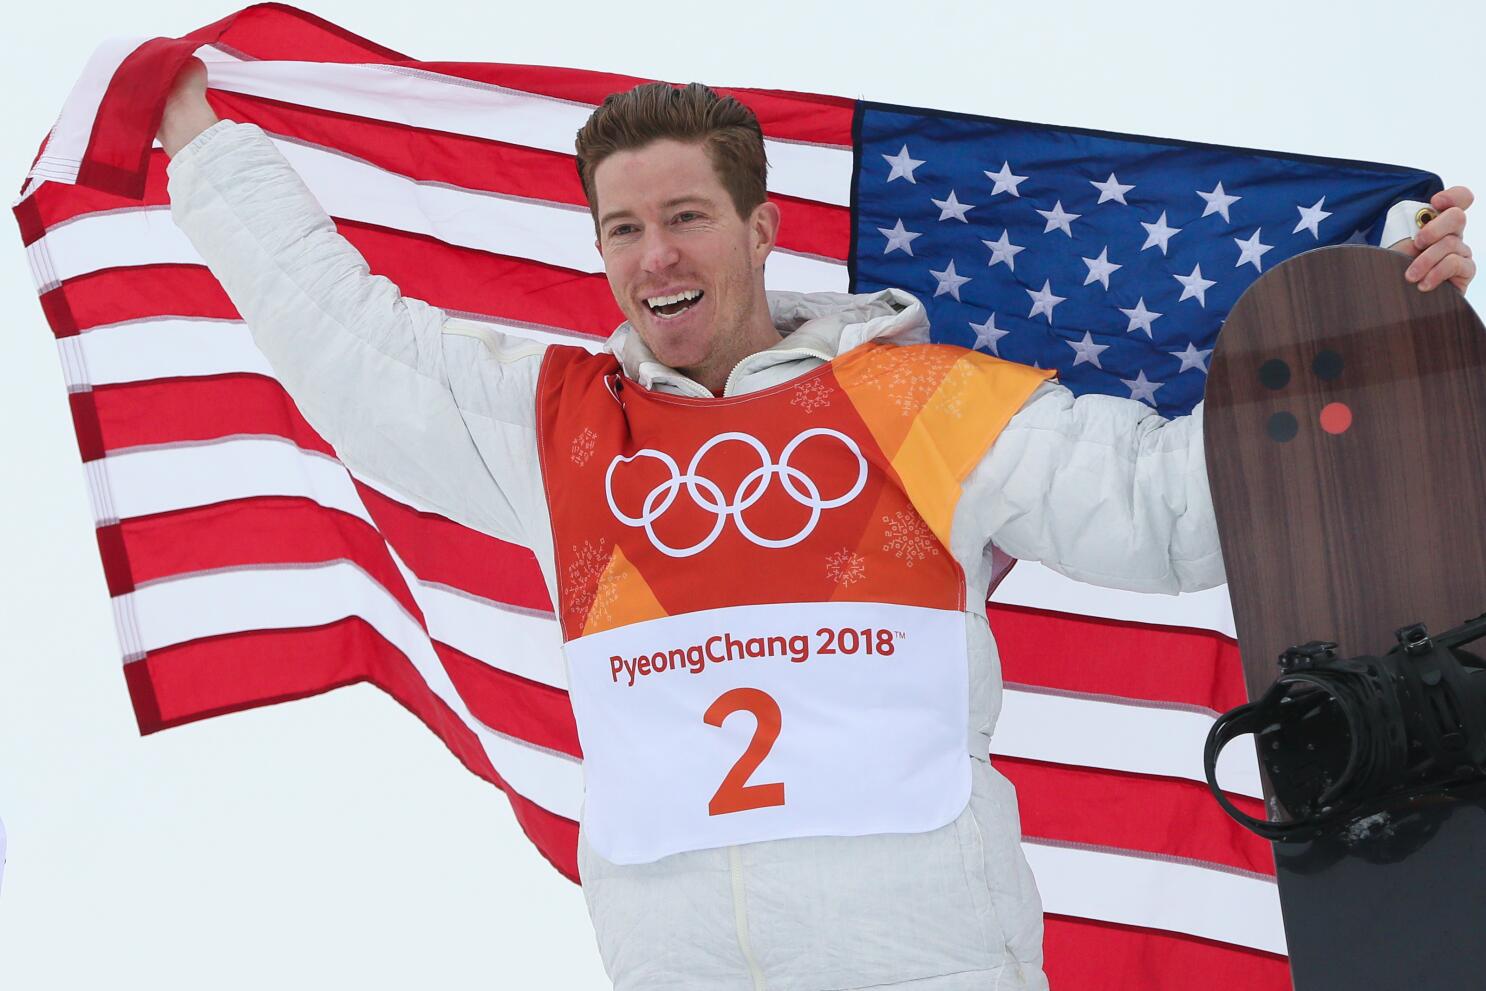 Shaun White: 'I've decided this will be my last Olympics,' says US